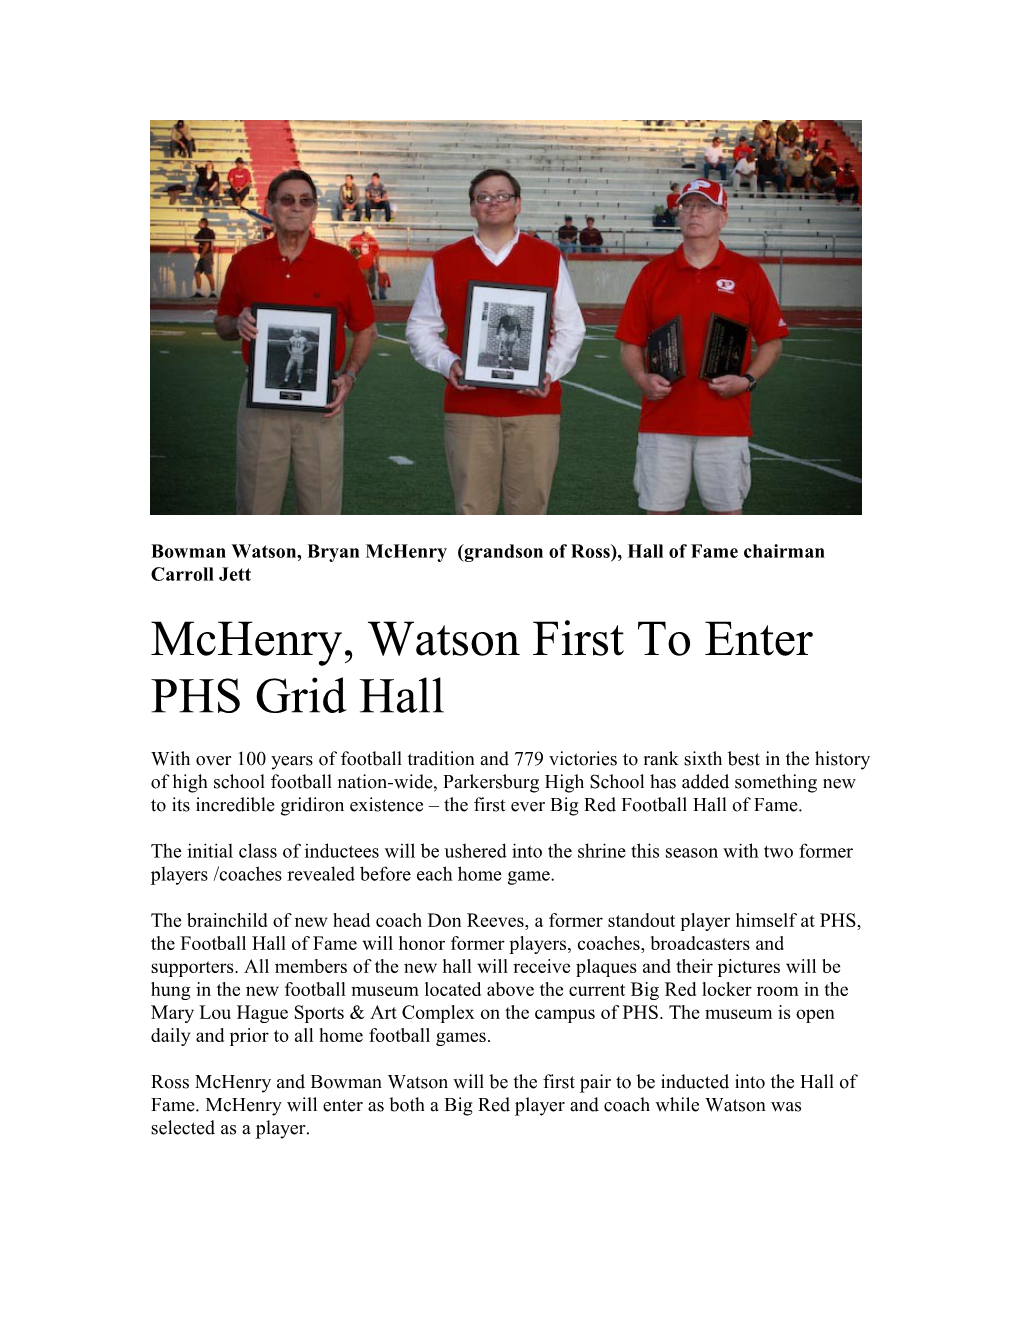 Mchenry, Watson First to Enter PHS Grid Hall